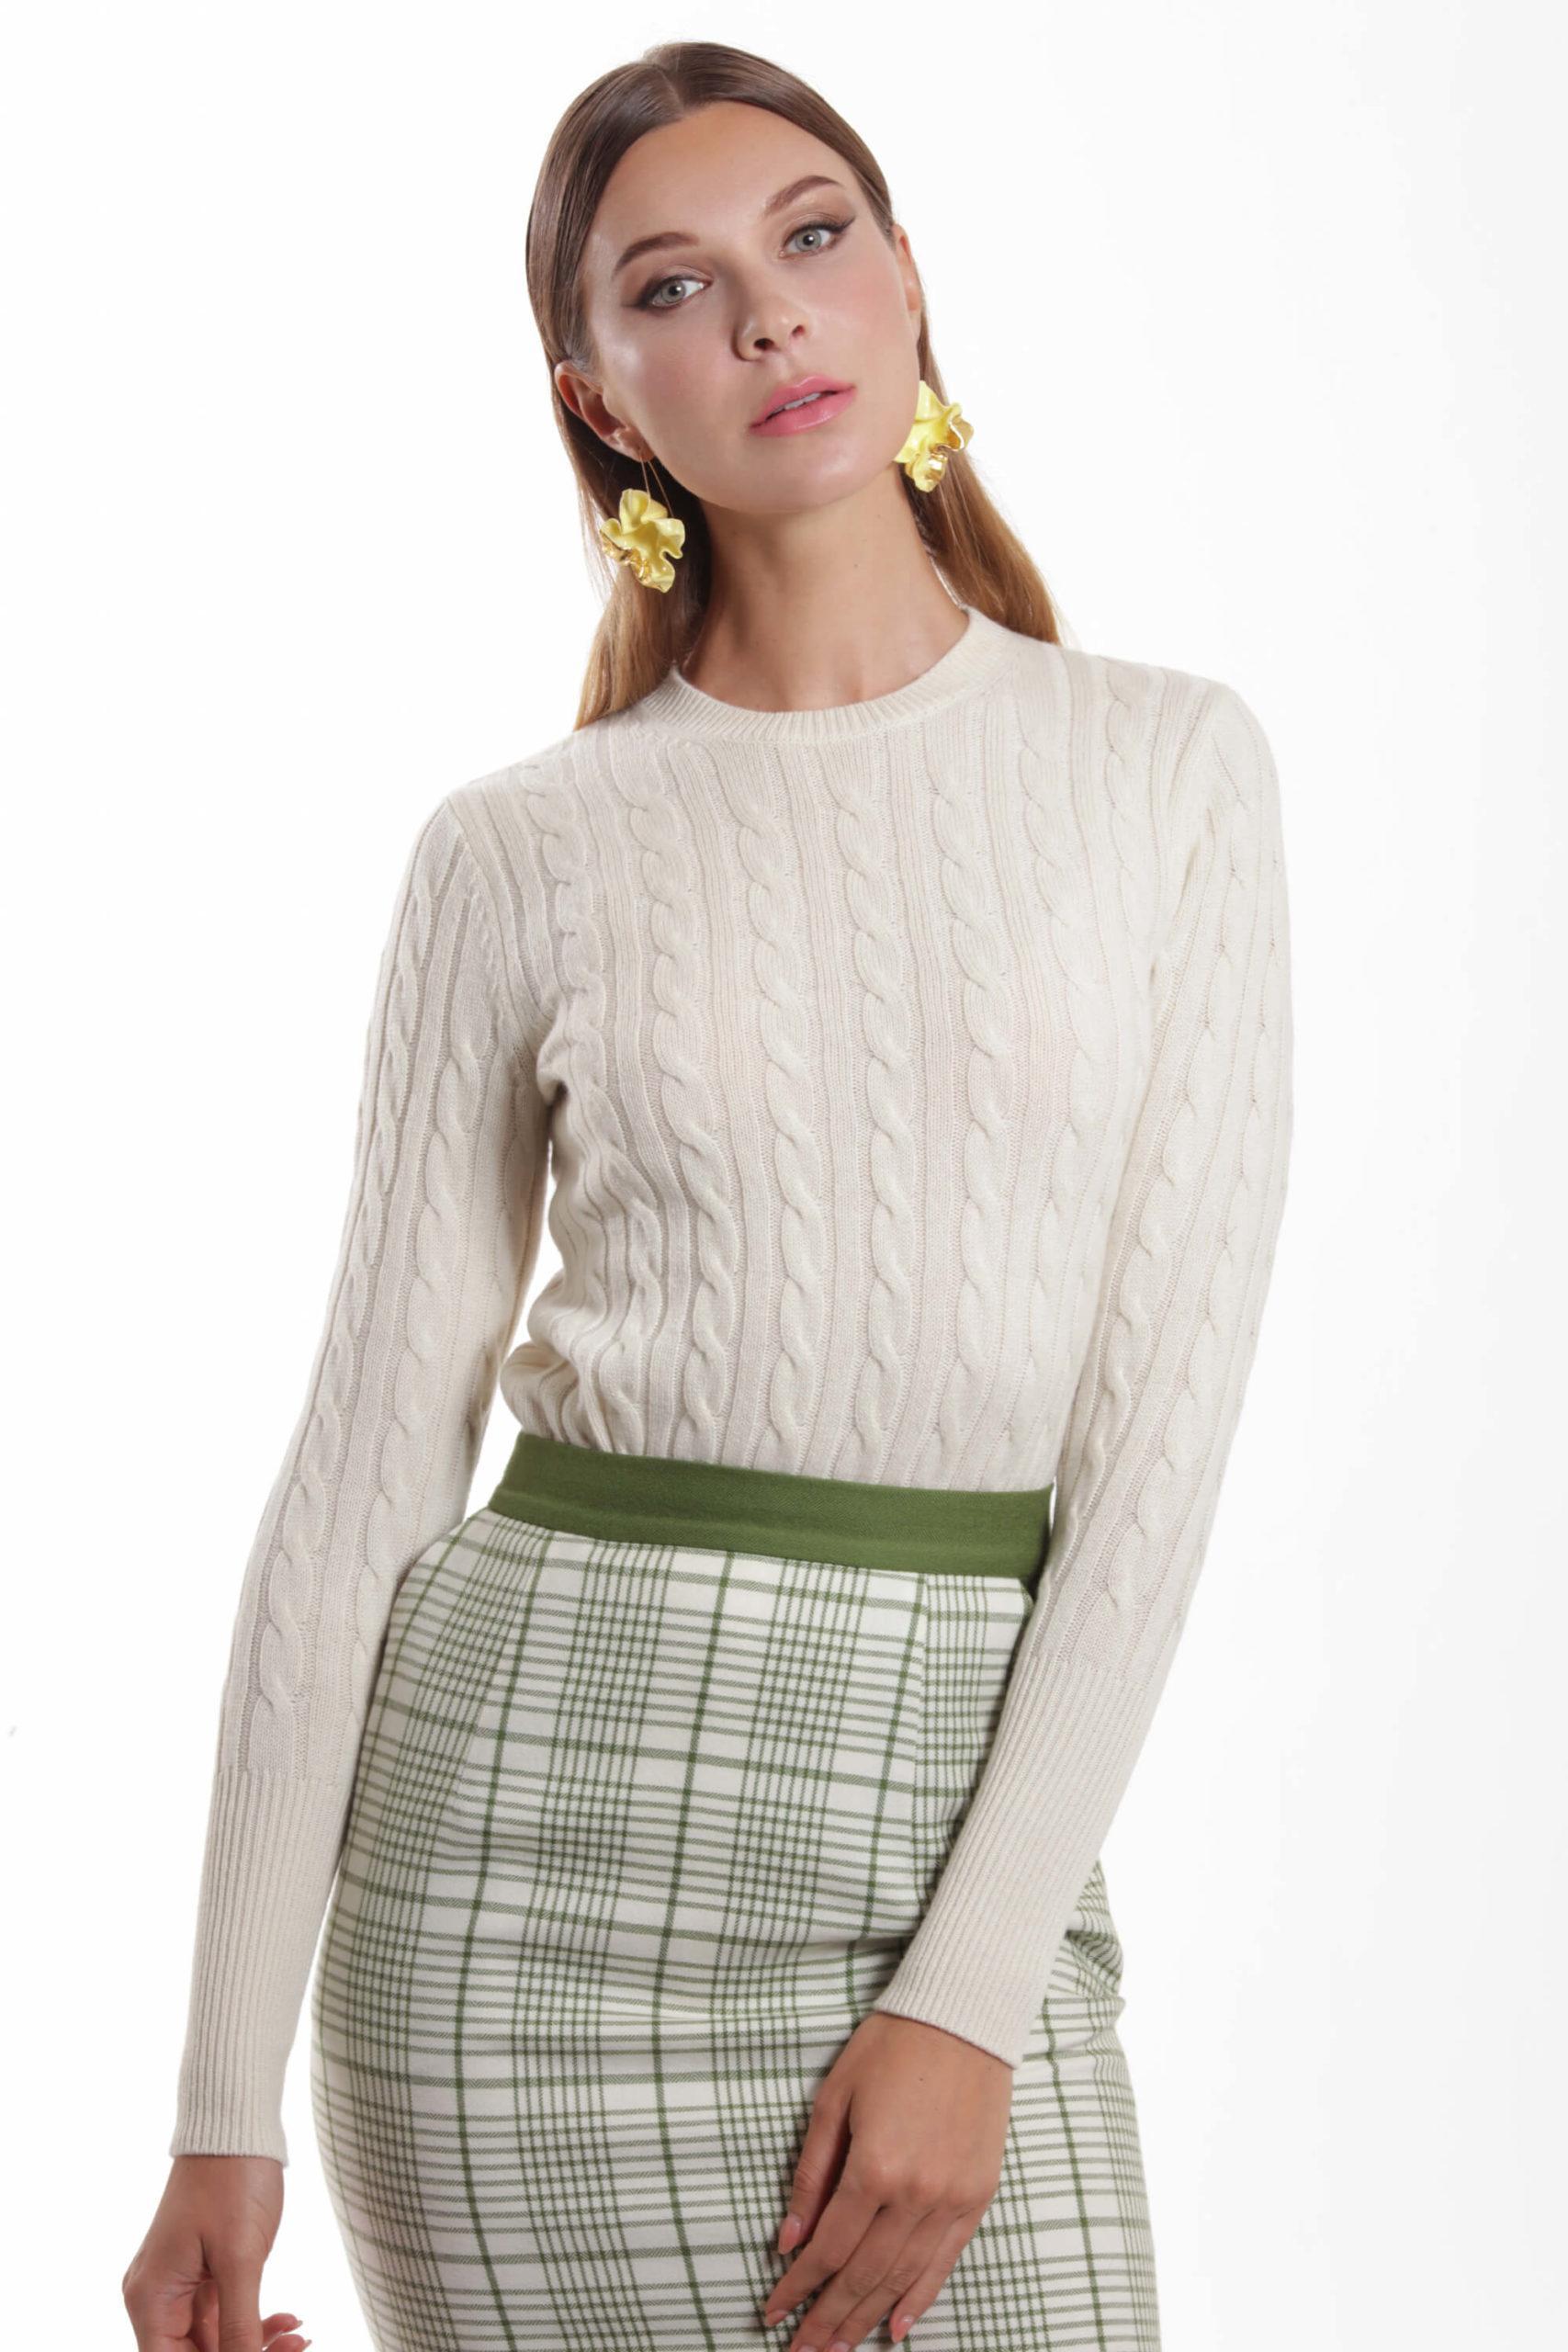 Strasbourg – Cable knit cashmere sweater in white